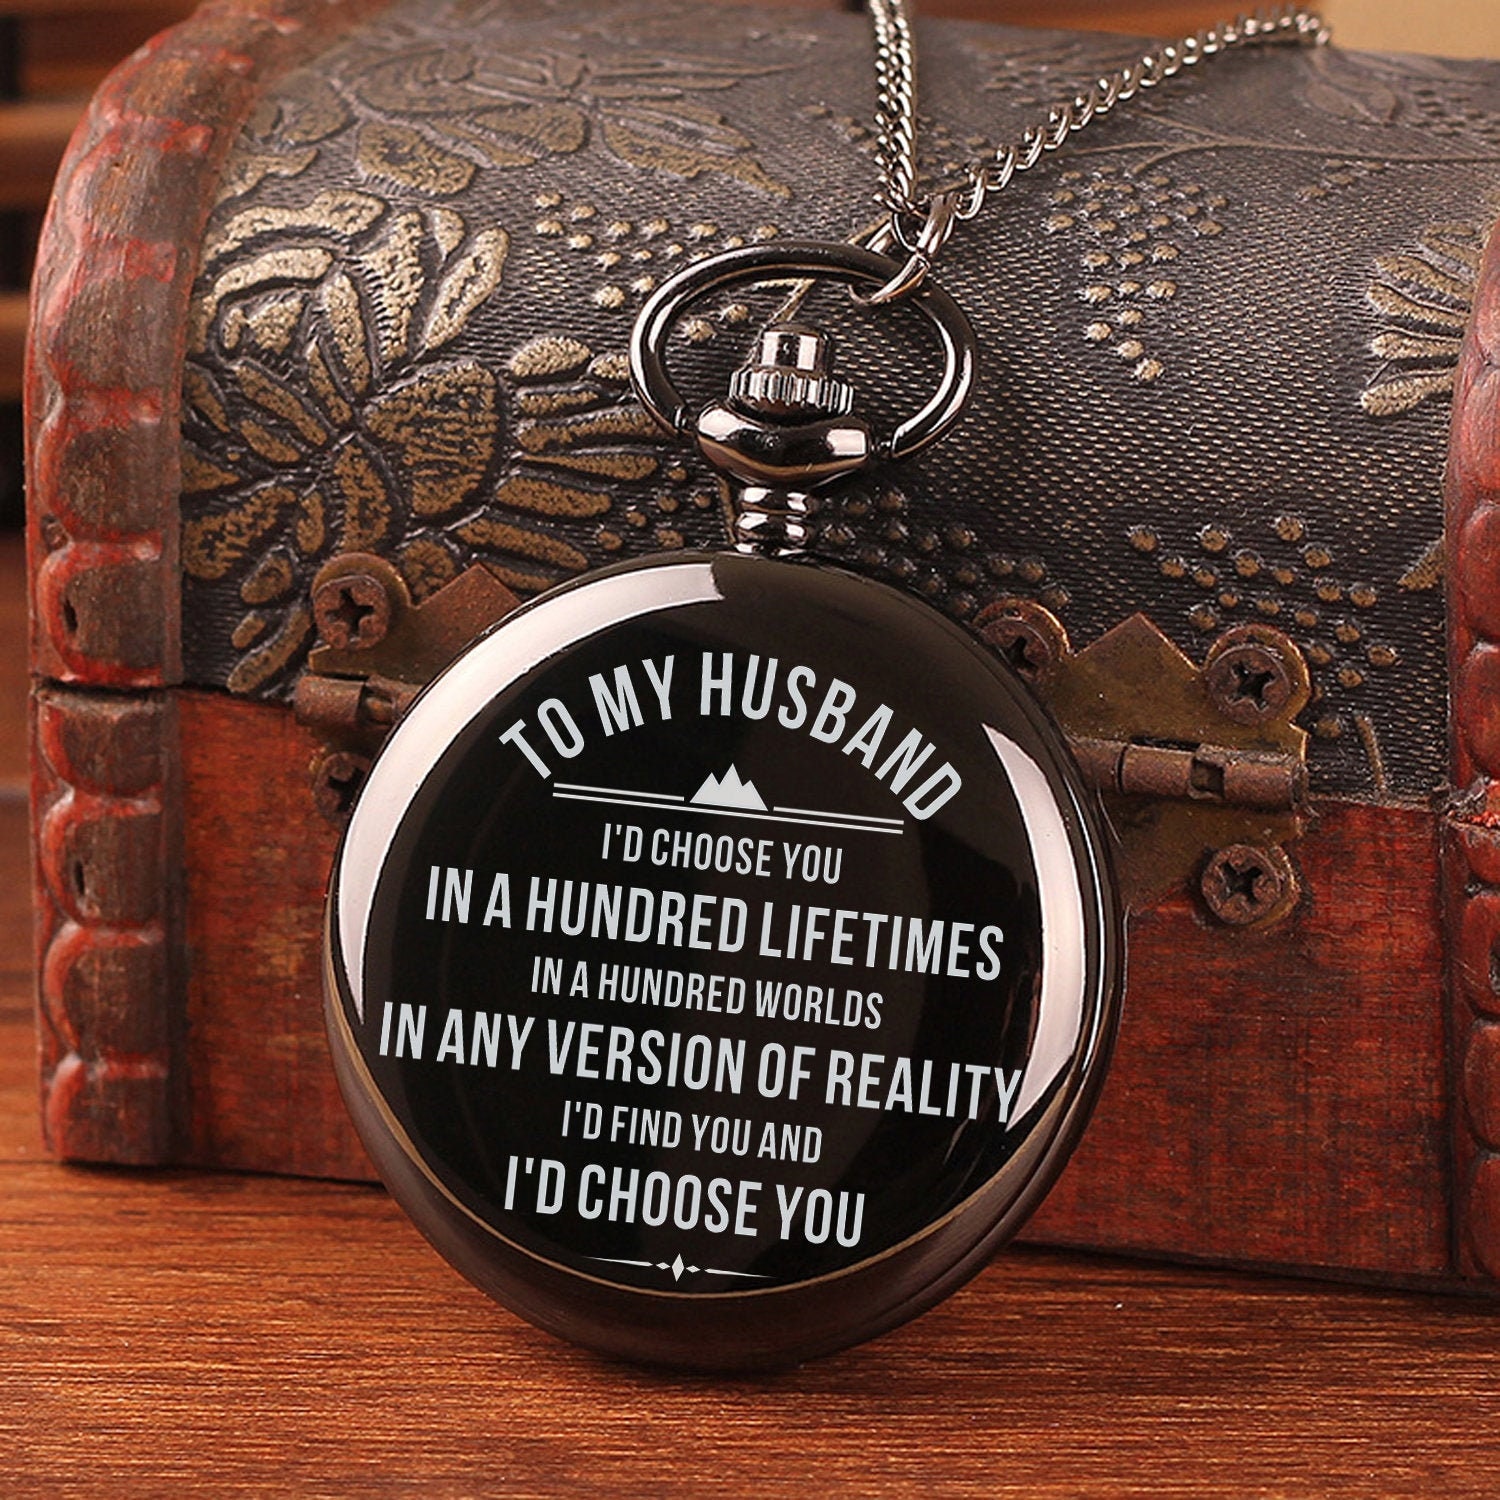 To My Husband I'd Choose You Engraved Pocket Watch Time | Etsy